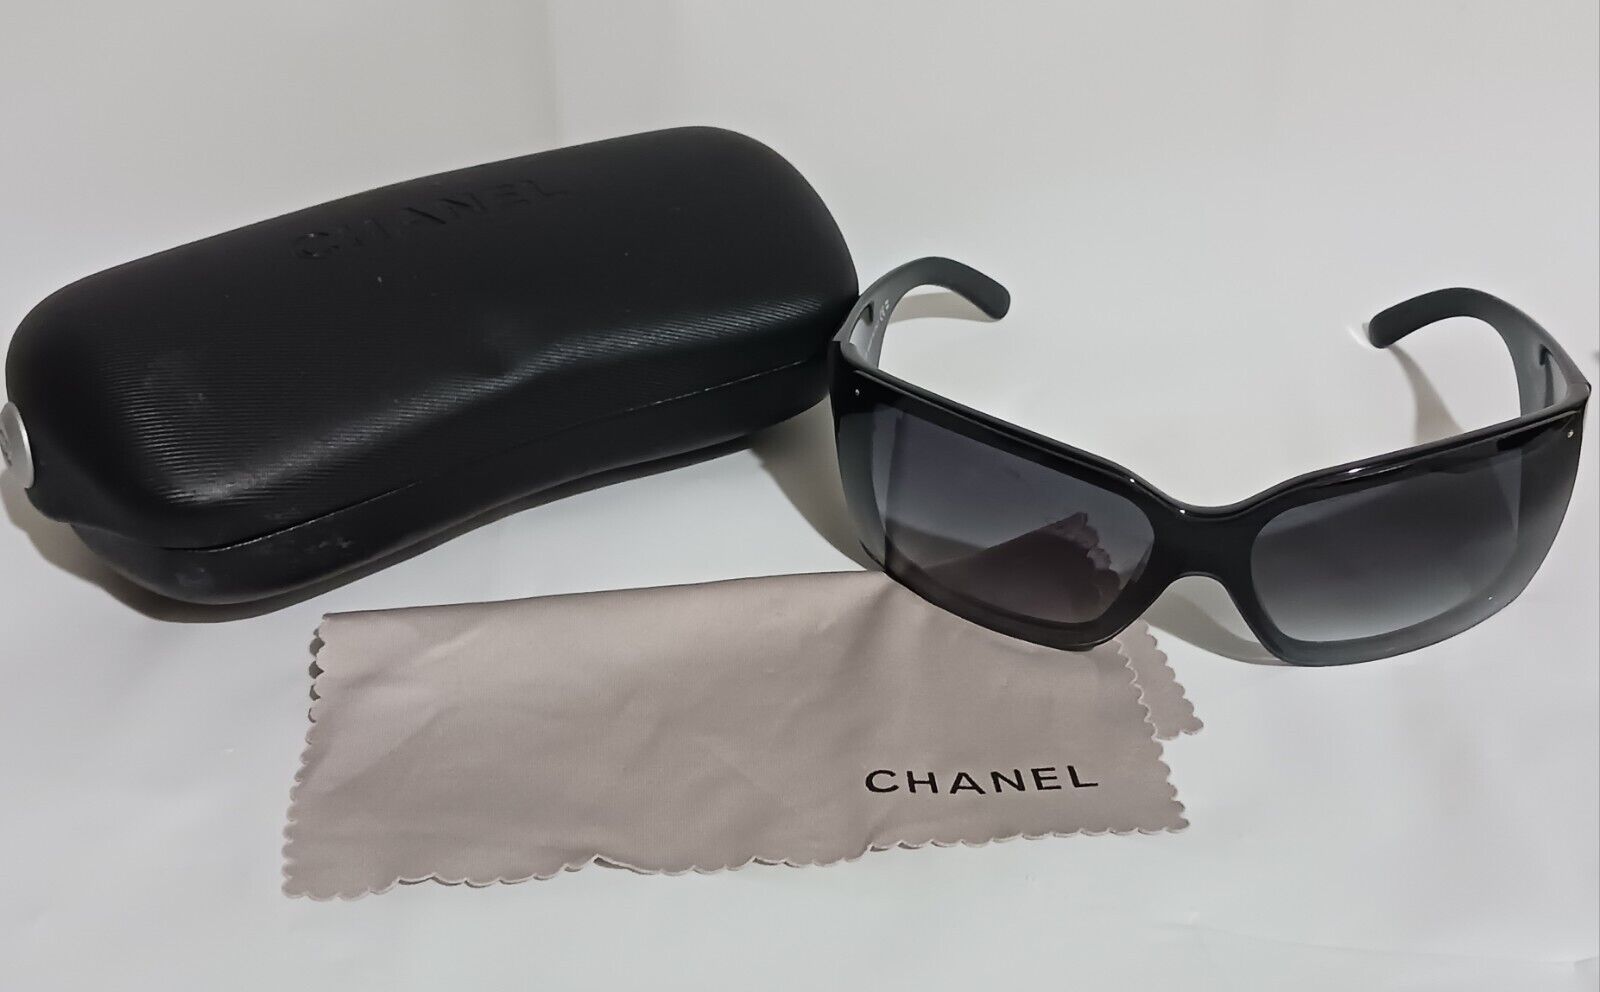 CHANEL 6012 c.501/8G Black Frame Sunglasses Made In ITALY